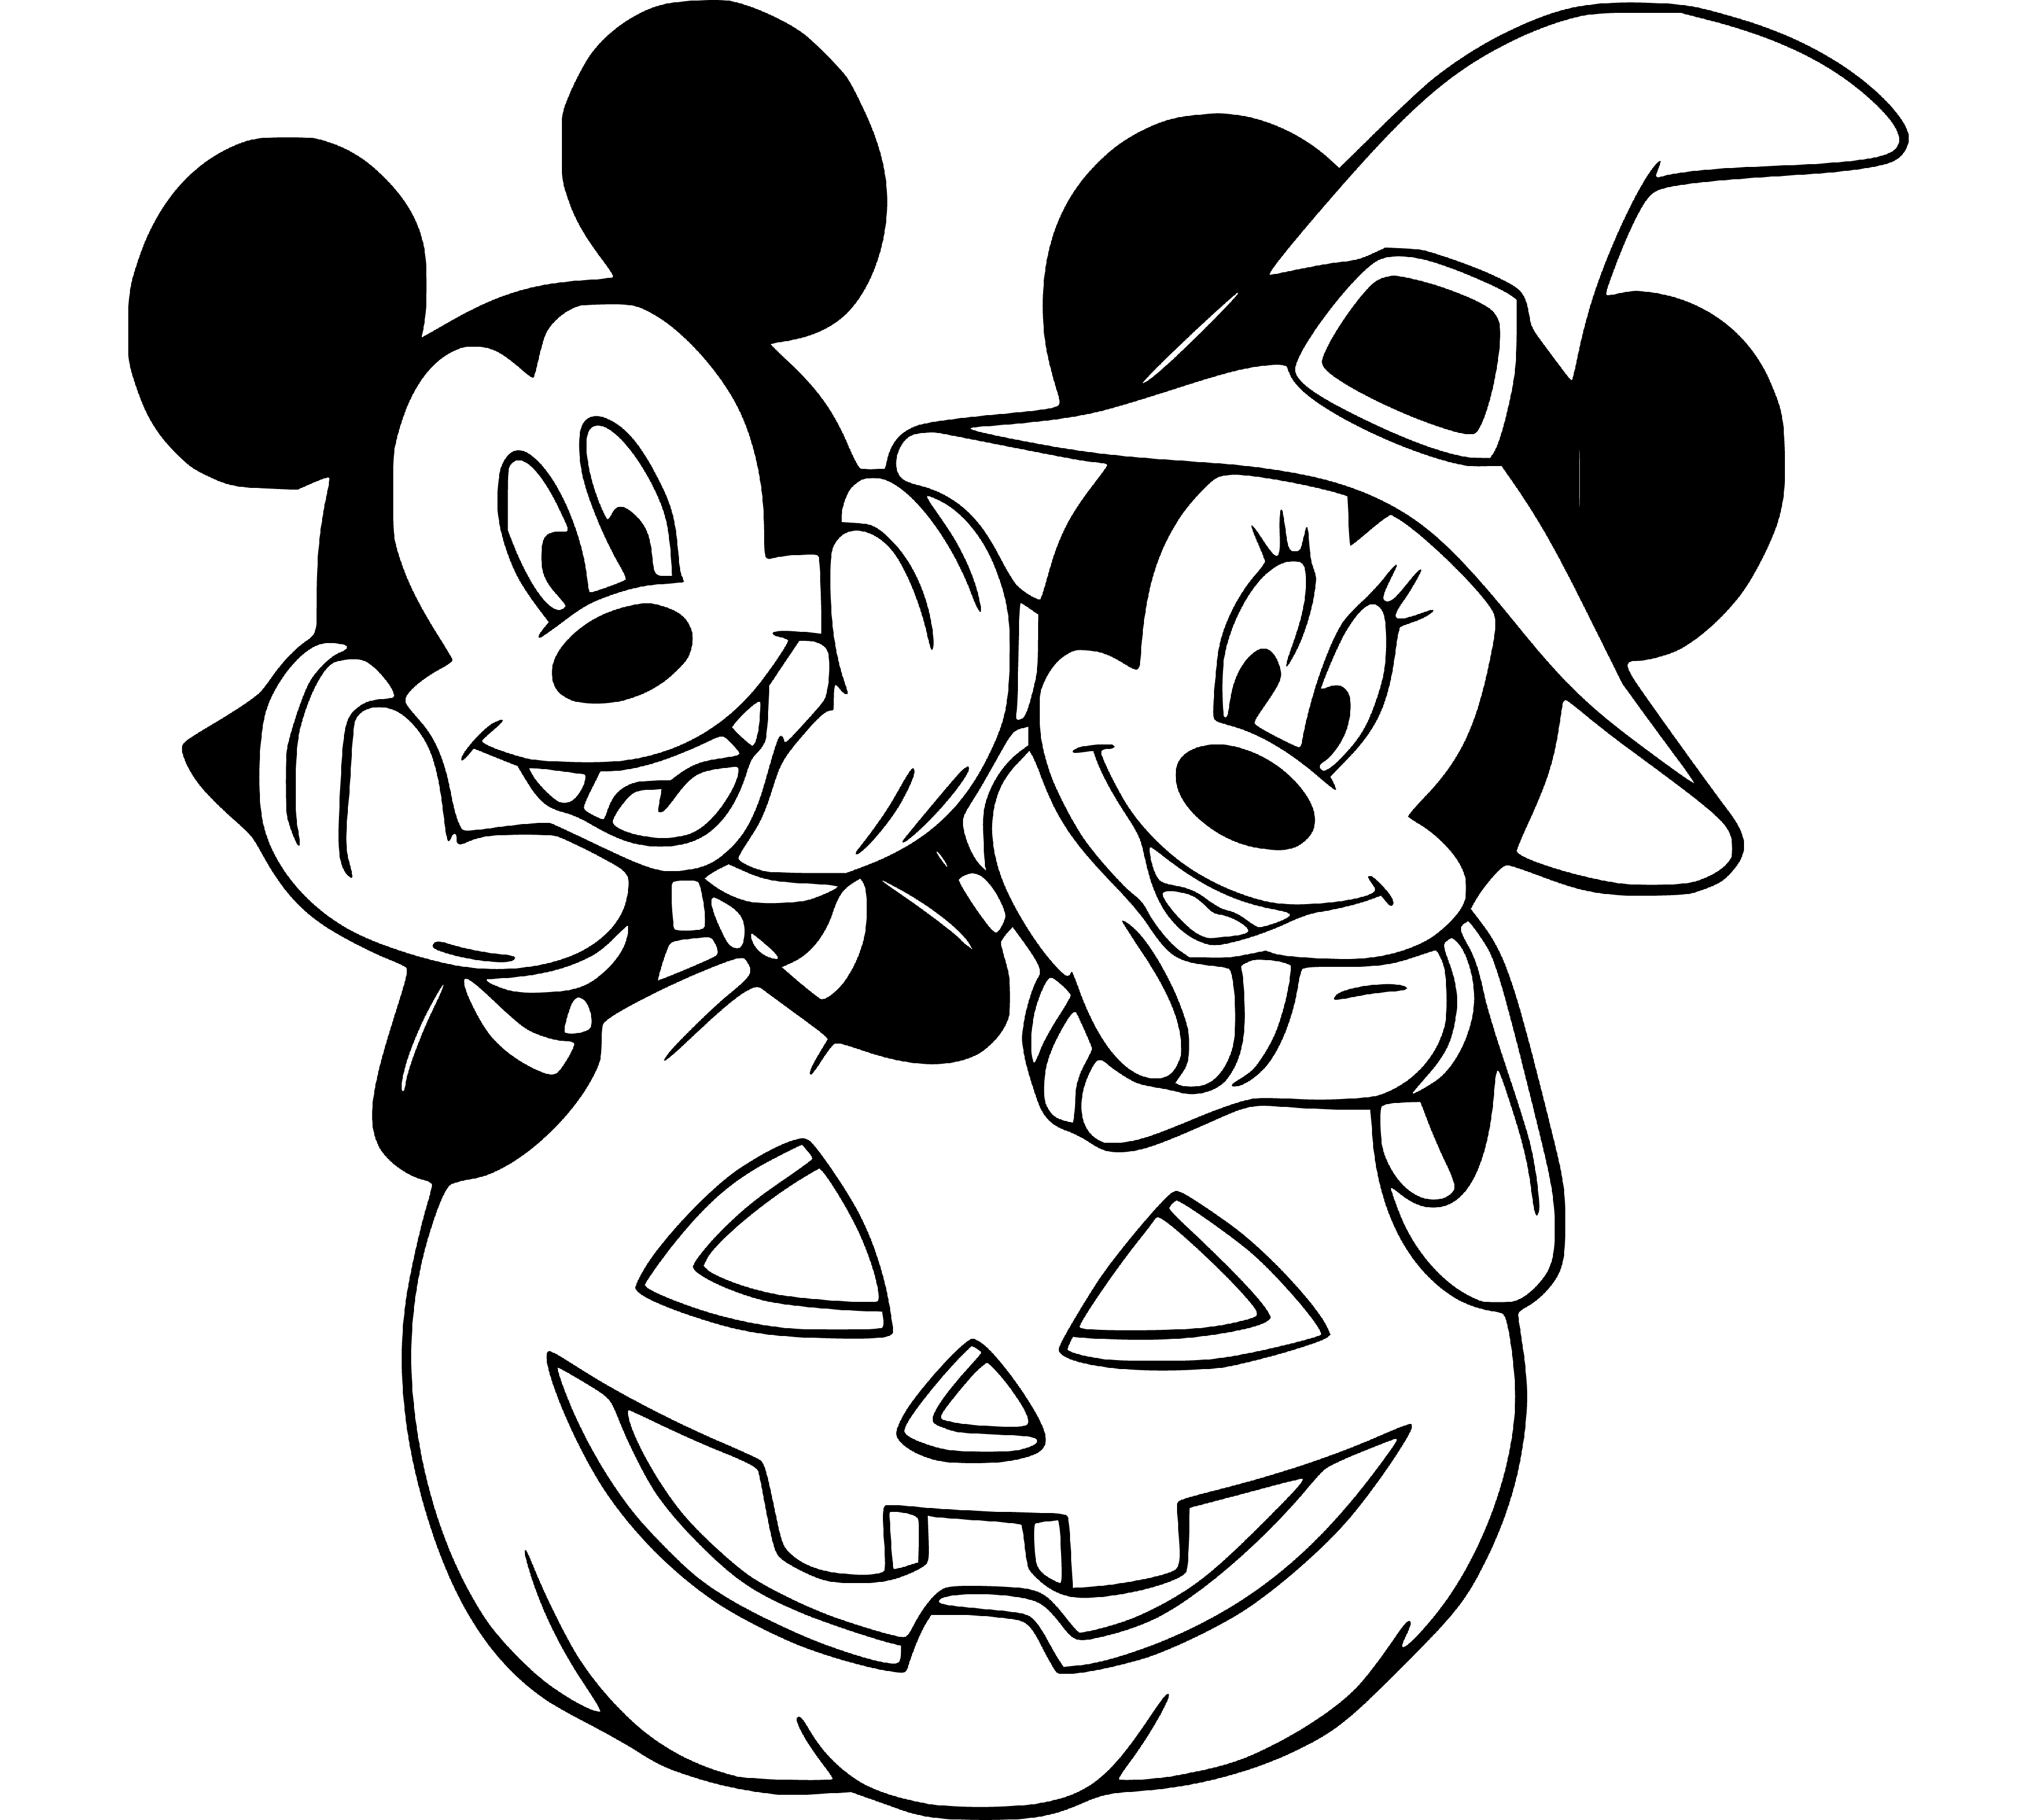 Mickey and Minnie Mouse Halloween Coloring Page Disney - SheetalColor.com